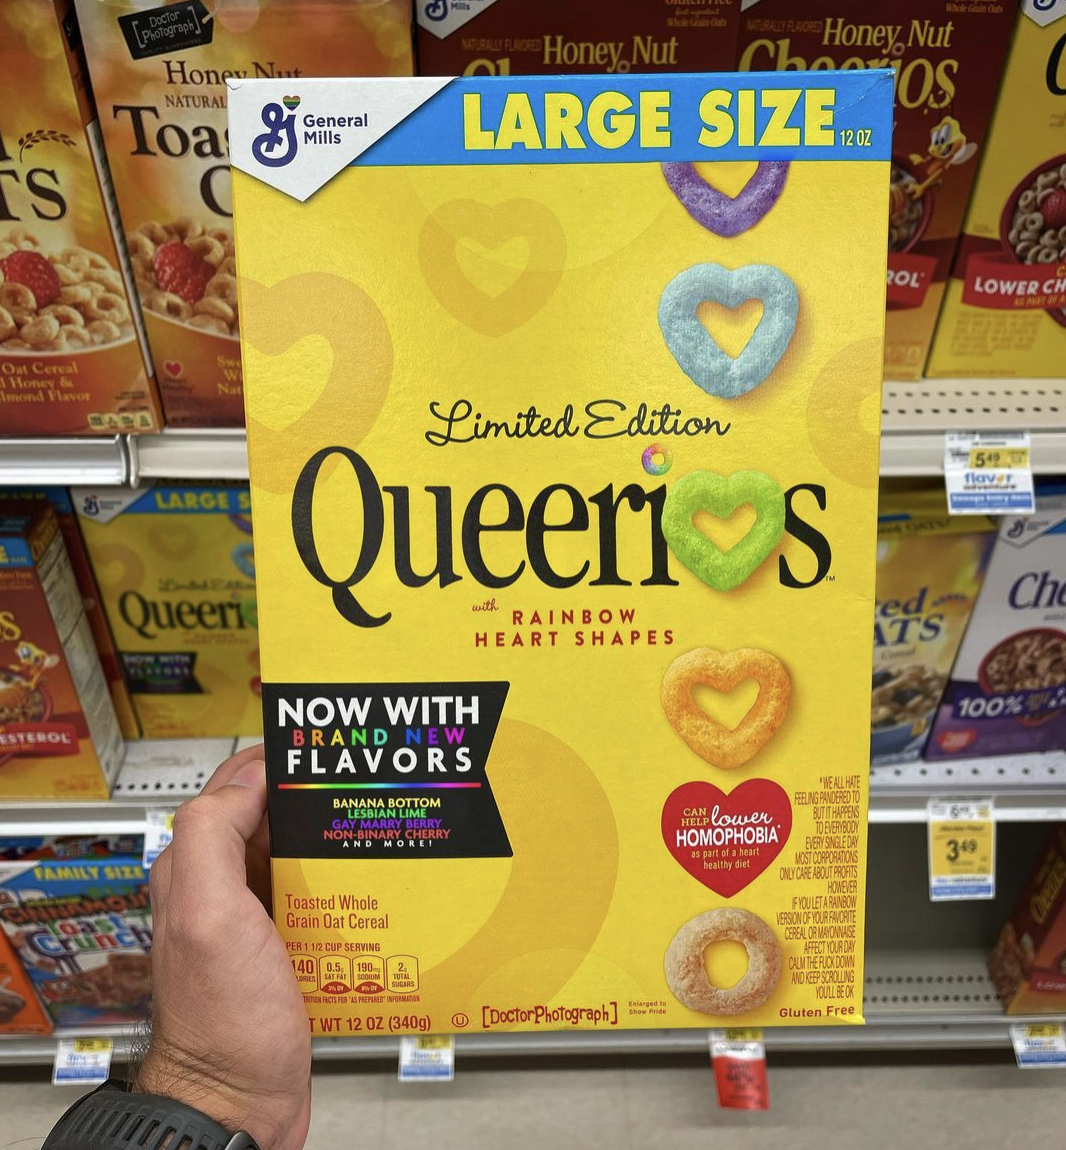 doctor photograph memes - queerios cereal - Oft Card Mo Entr Pimp Toa Ts Ryterol Hone N Natumal Large Queeri General Mills Limited Edition Queeri s Heart Shapes Now With Brand New Flavors Banana Bottom Lishanling Honey, Nut Choc Large Size Toasted Whole G